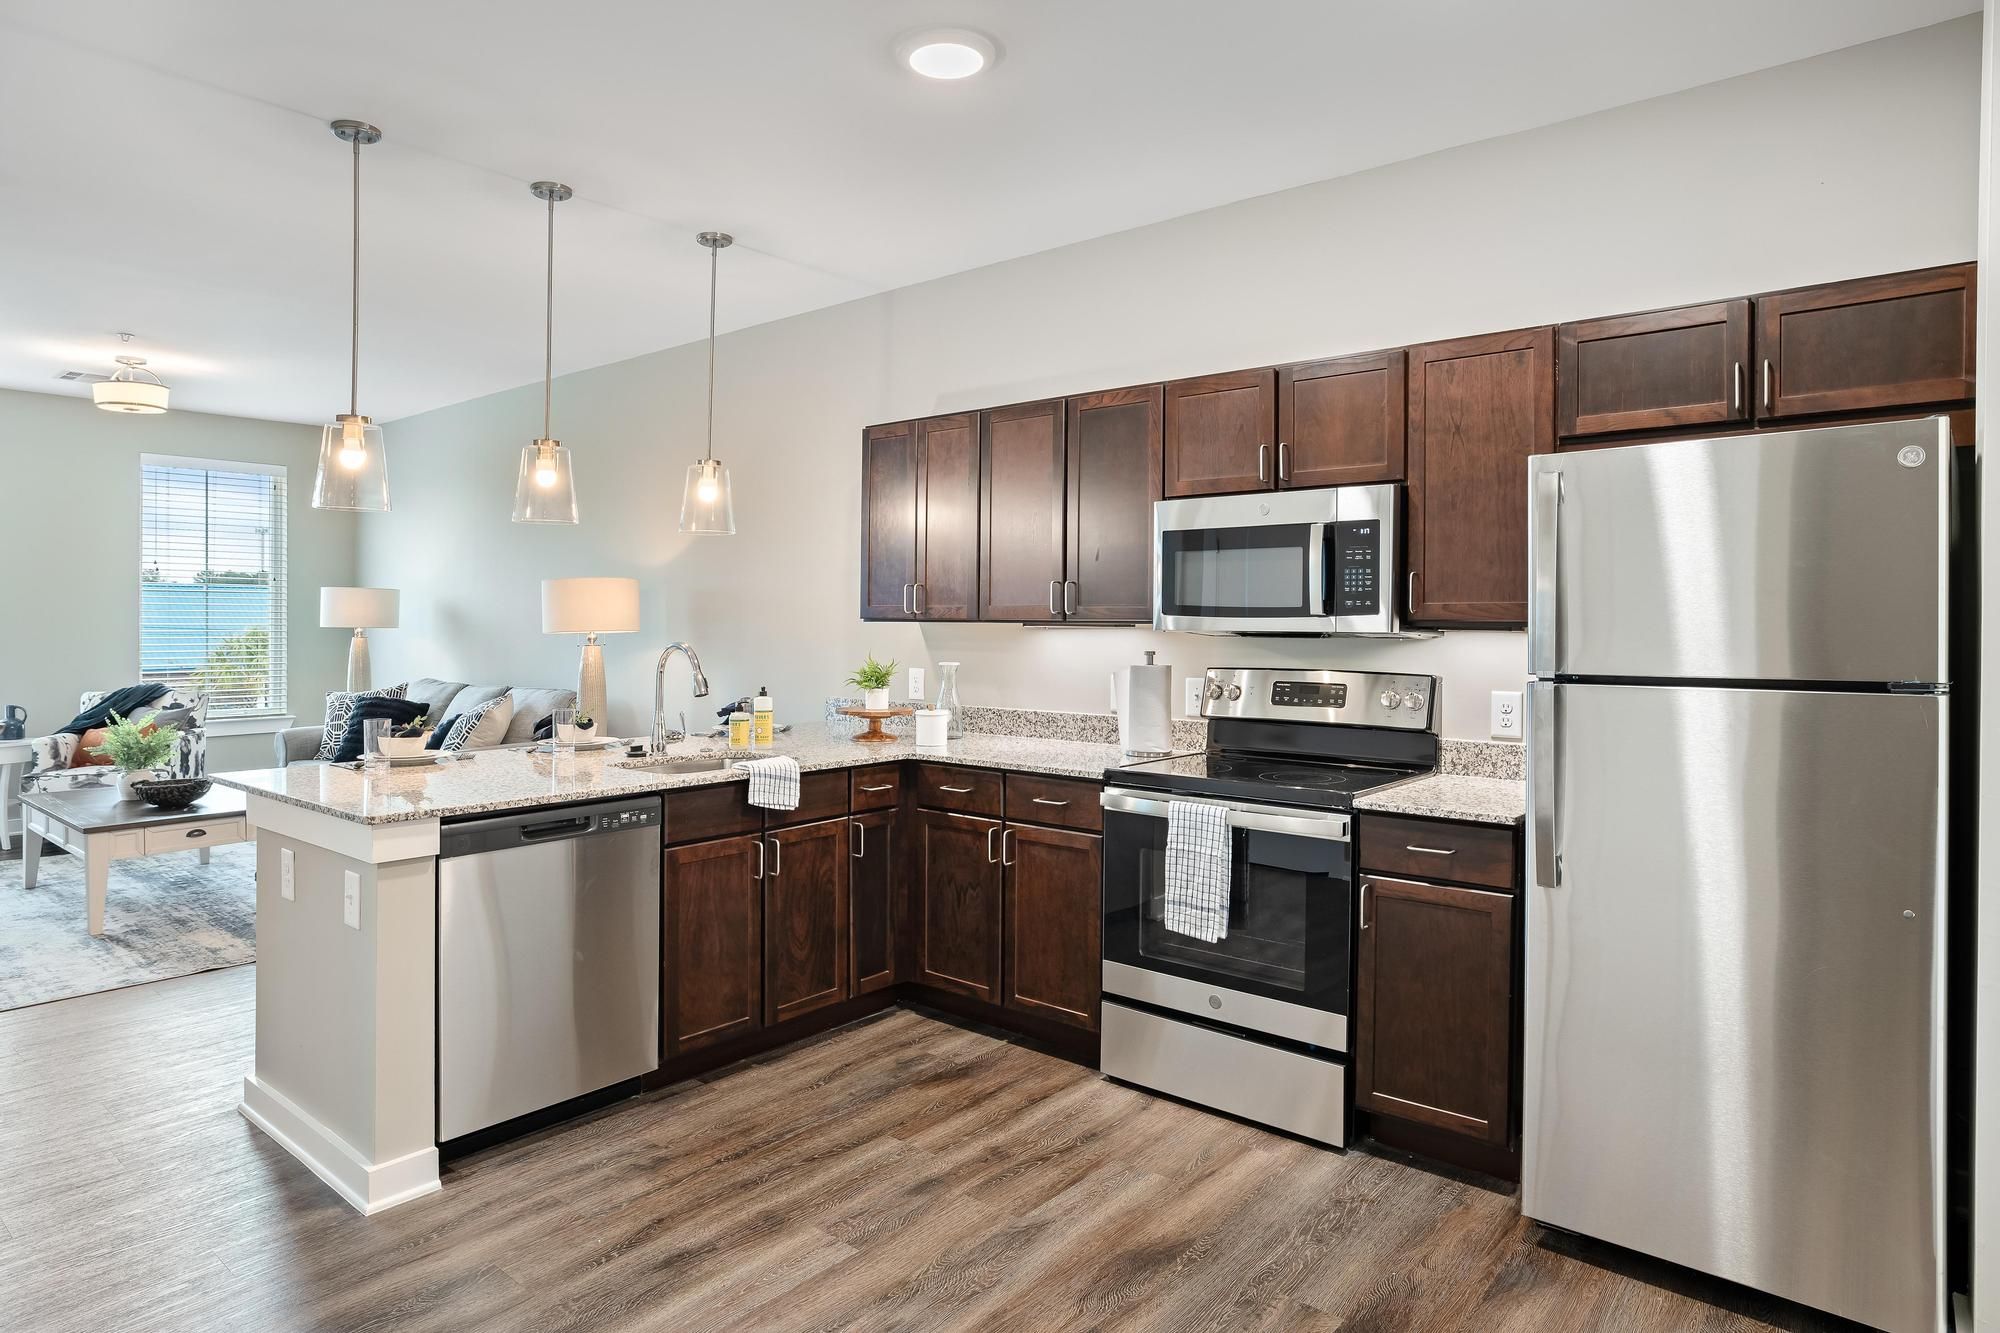 The Claiborne at Brickyard Crossing senior apartment full kitchen with high-end design and appliances